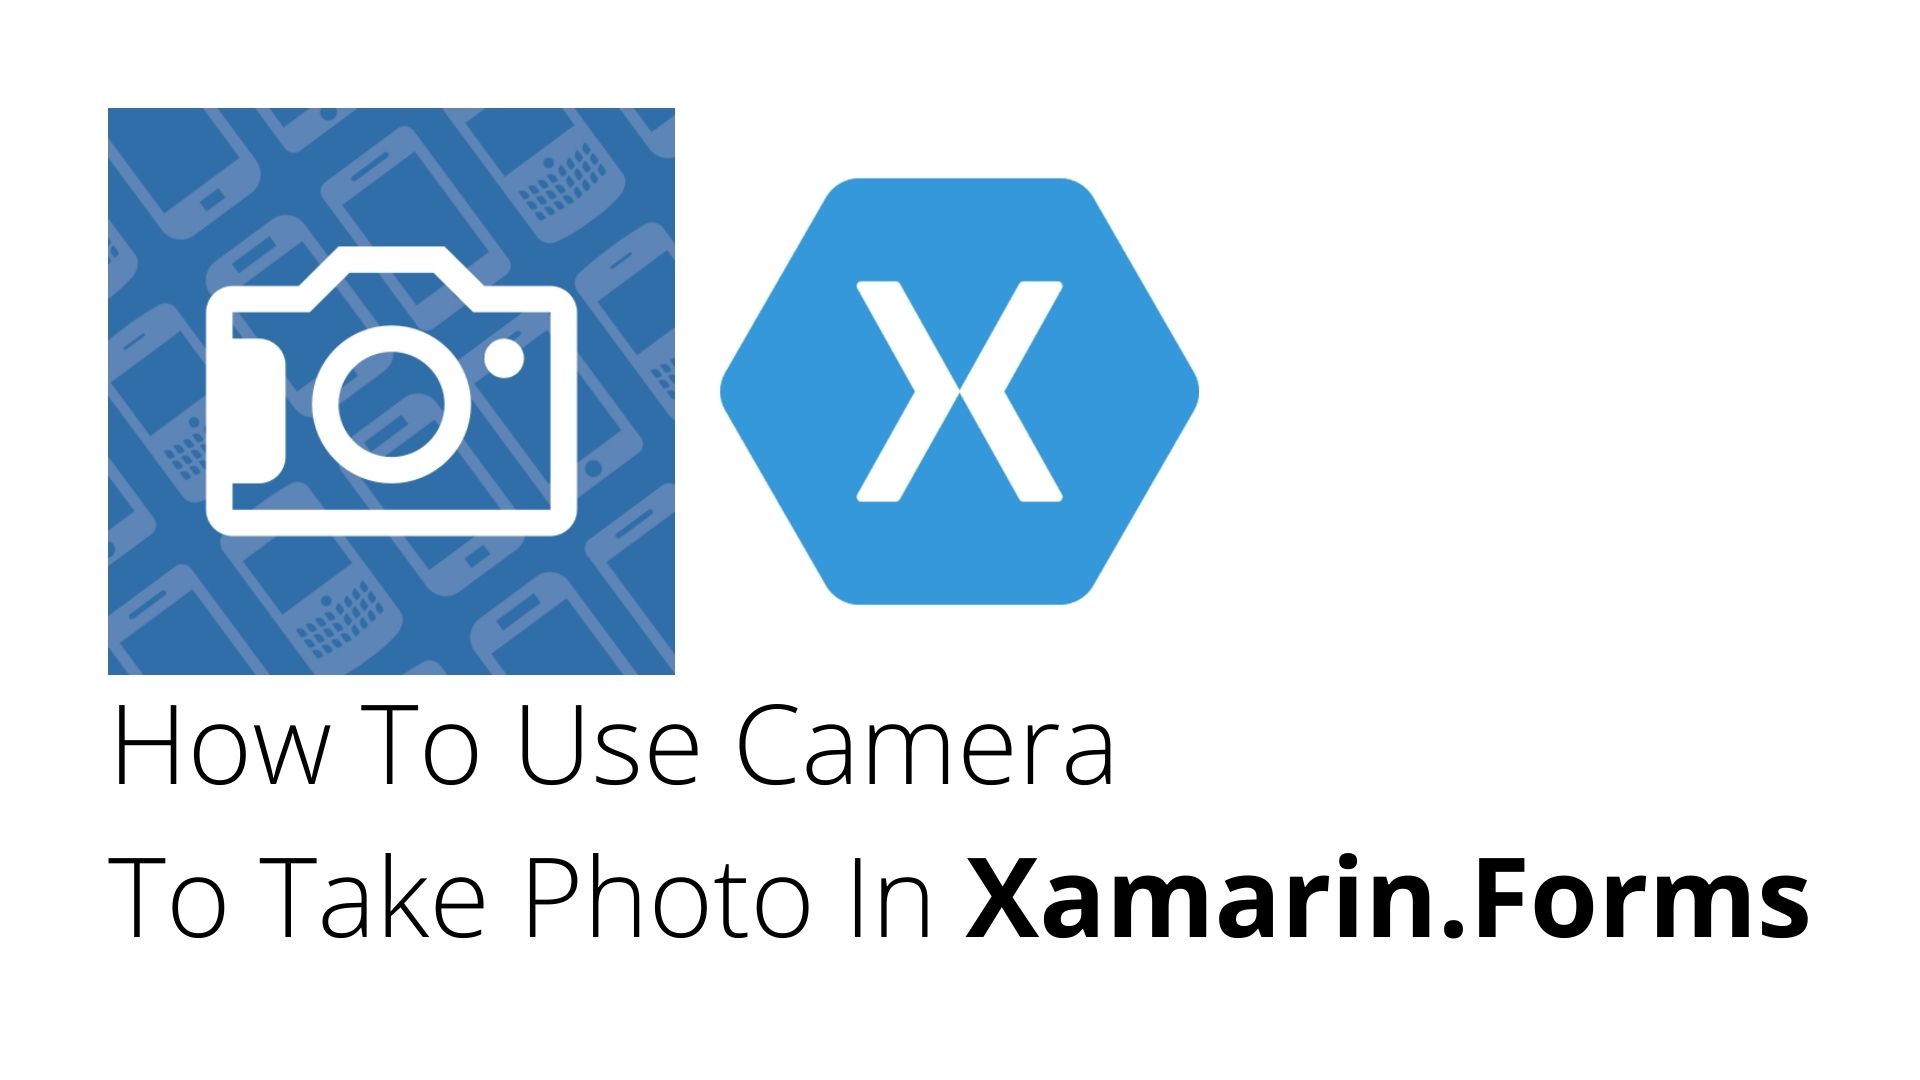 How To Use Camera To Take Photo In Xamarin.Forms